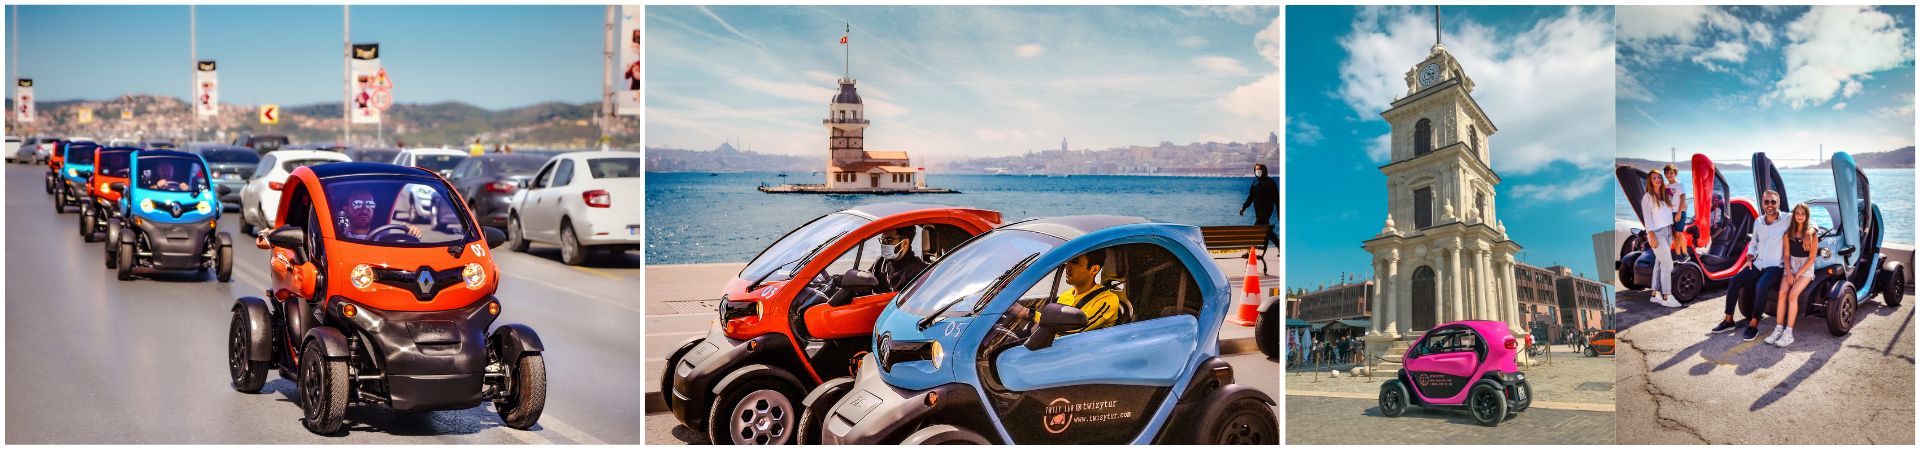 Twizy Tour (Discounted)